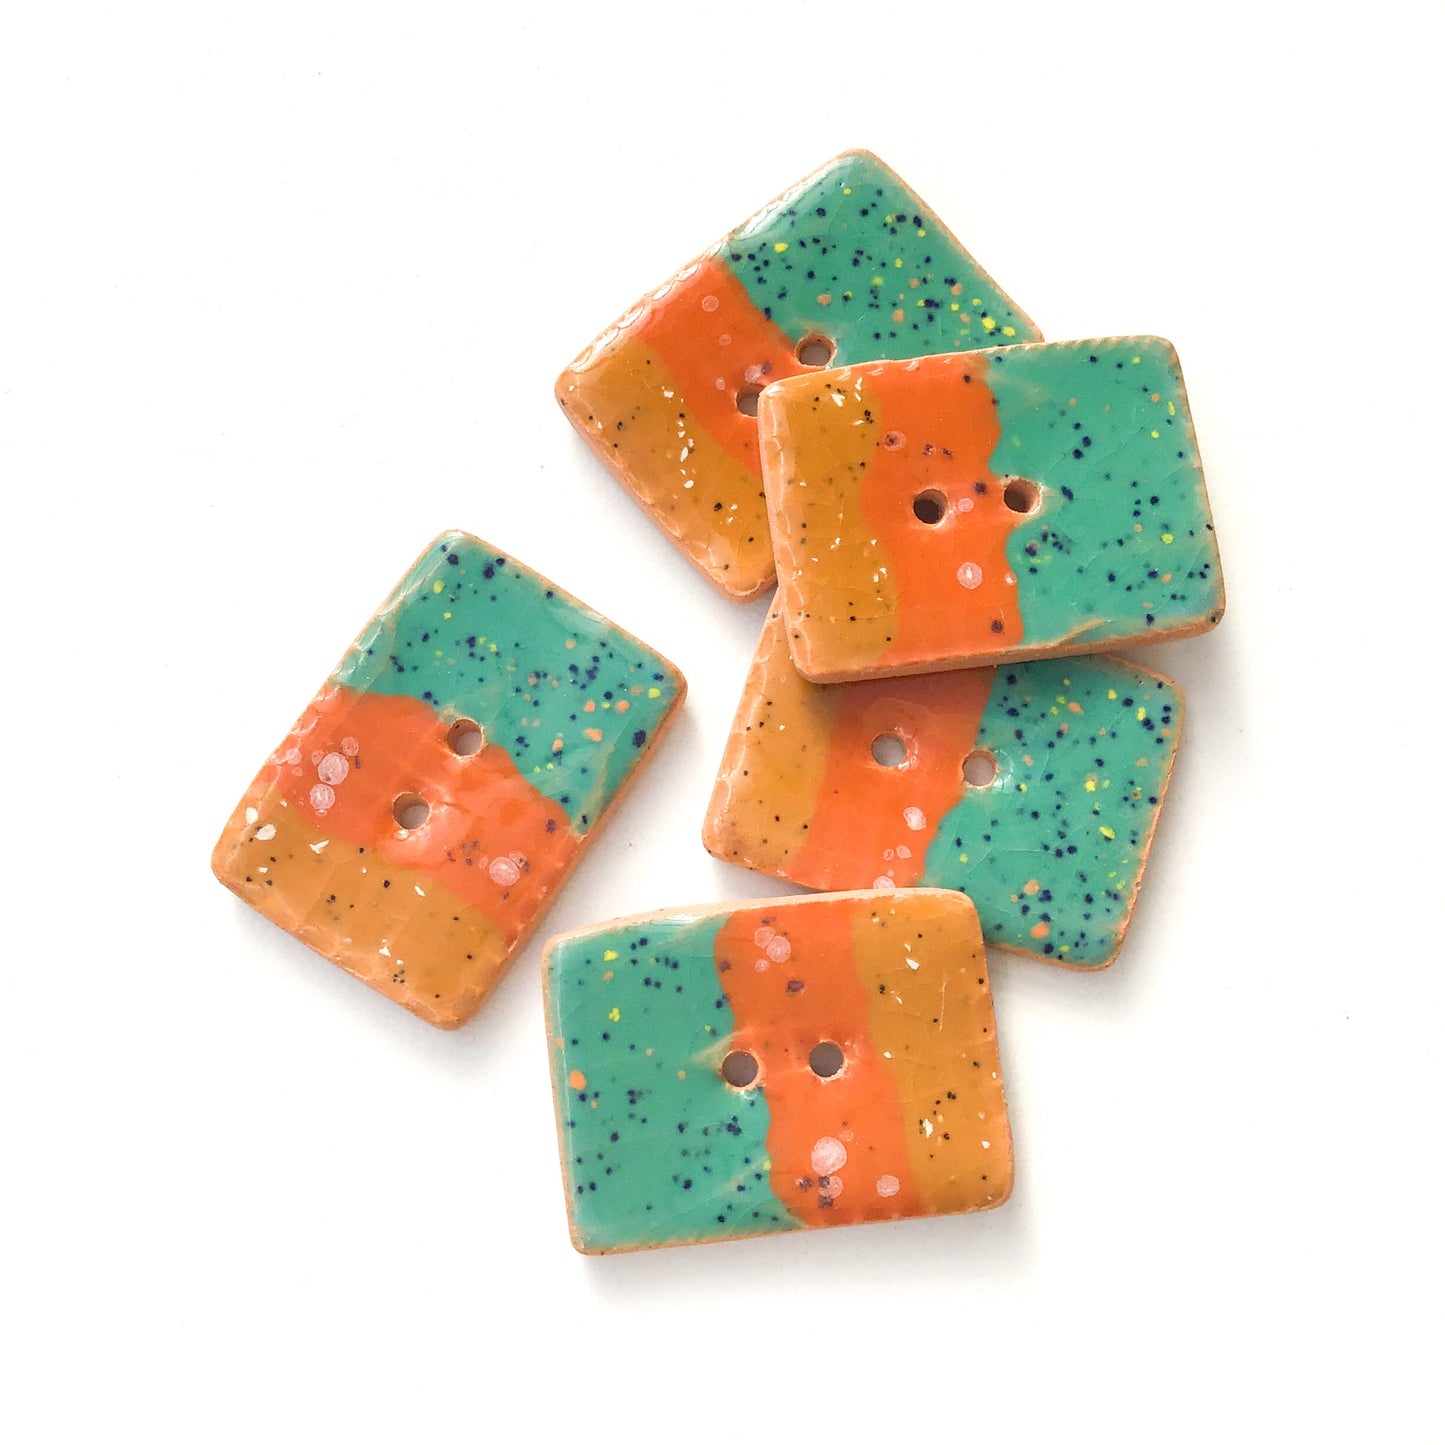 Tri-Color Rectangle Buttons in Southwestern Shades - Turquoise - Orange - Brown - 3/4" x 1 1/16"